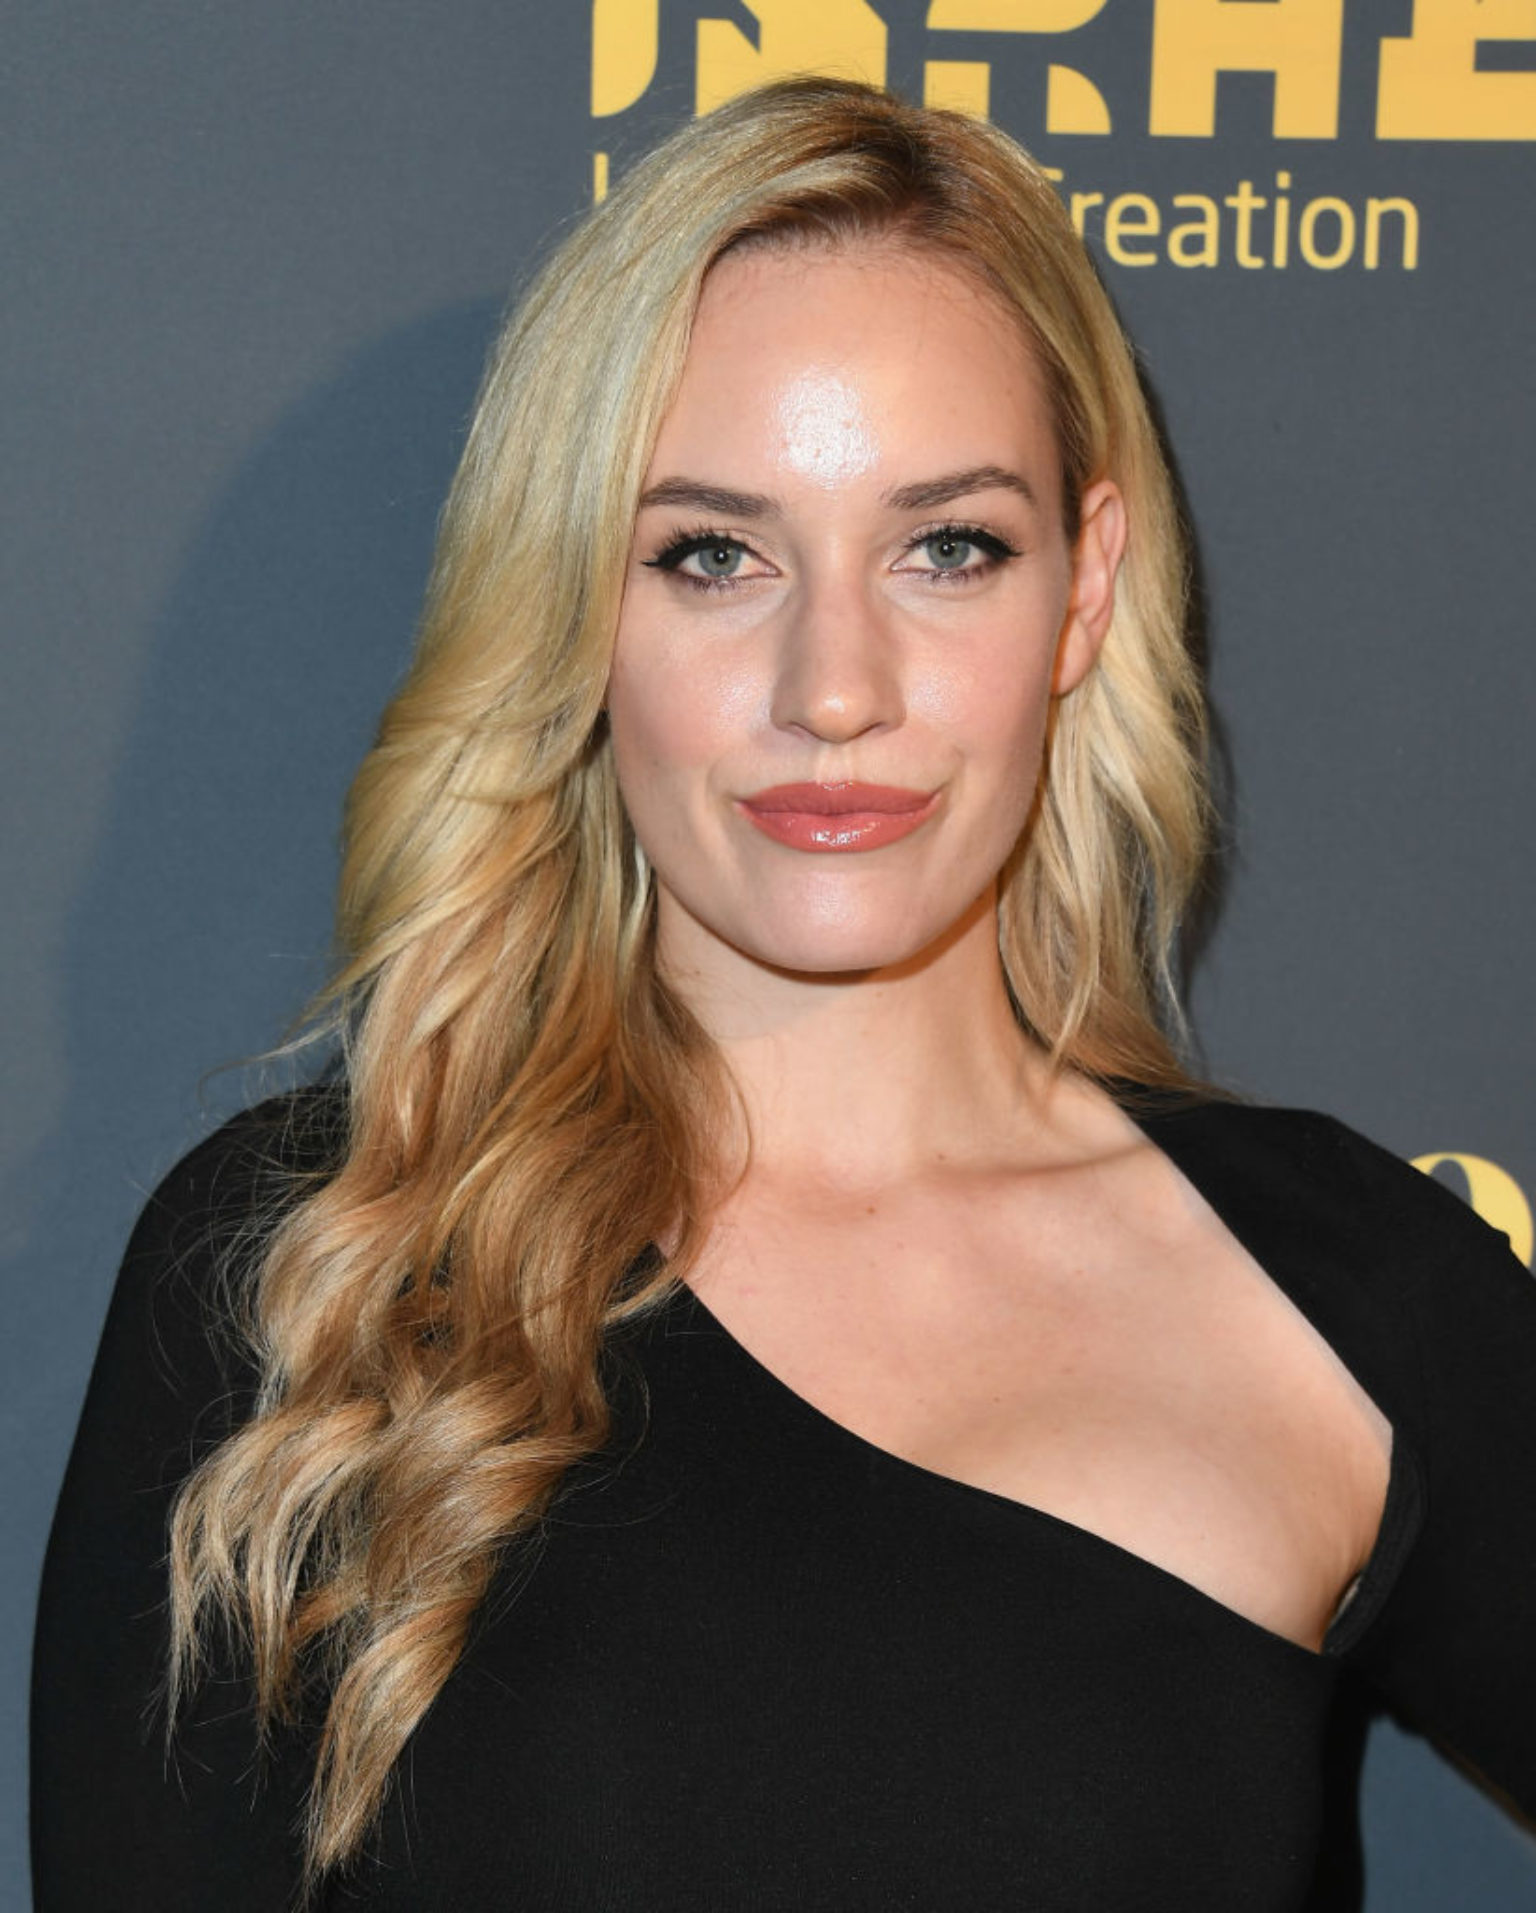 Paige Spiranac Said Something About ‘Banging Balls’ As Fans Tuned Her ...